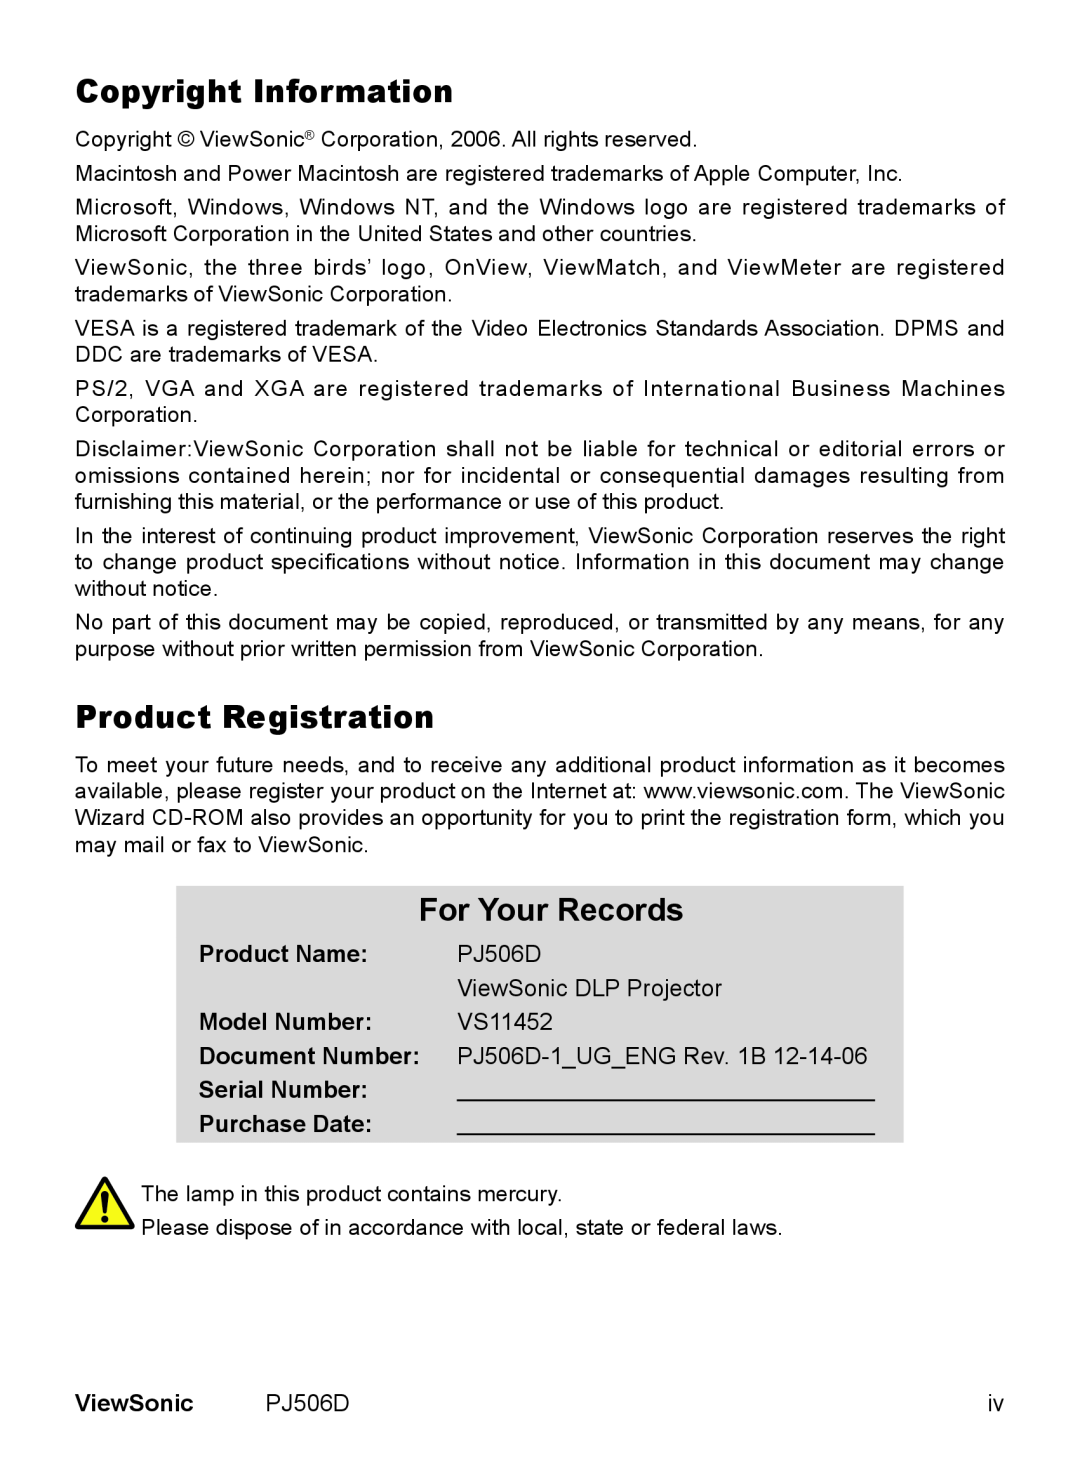 ViewSonic VS11452 Copyright Information, Product Registration, For Your Records, Product Name, Model Number, Serial Number 